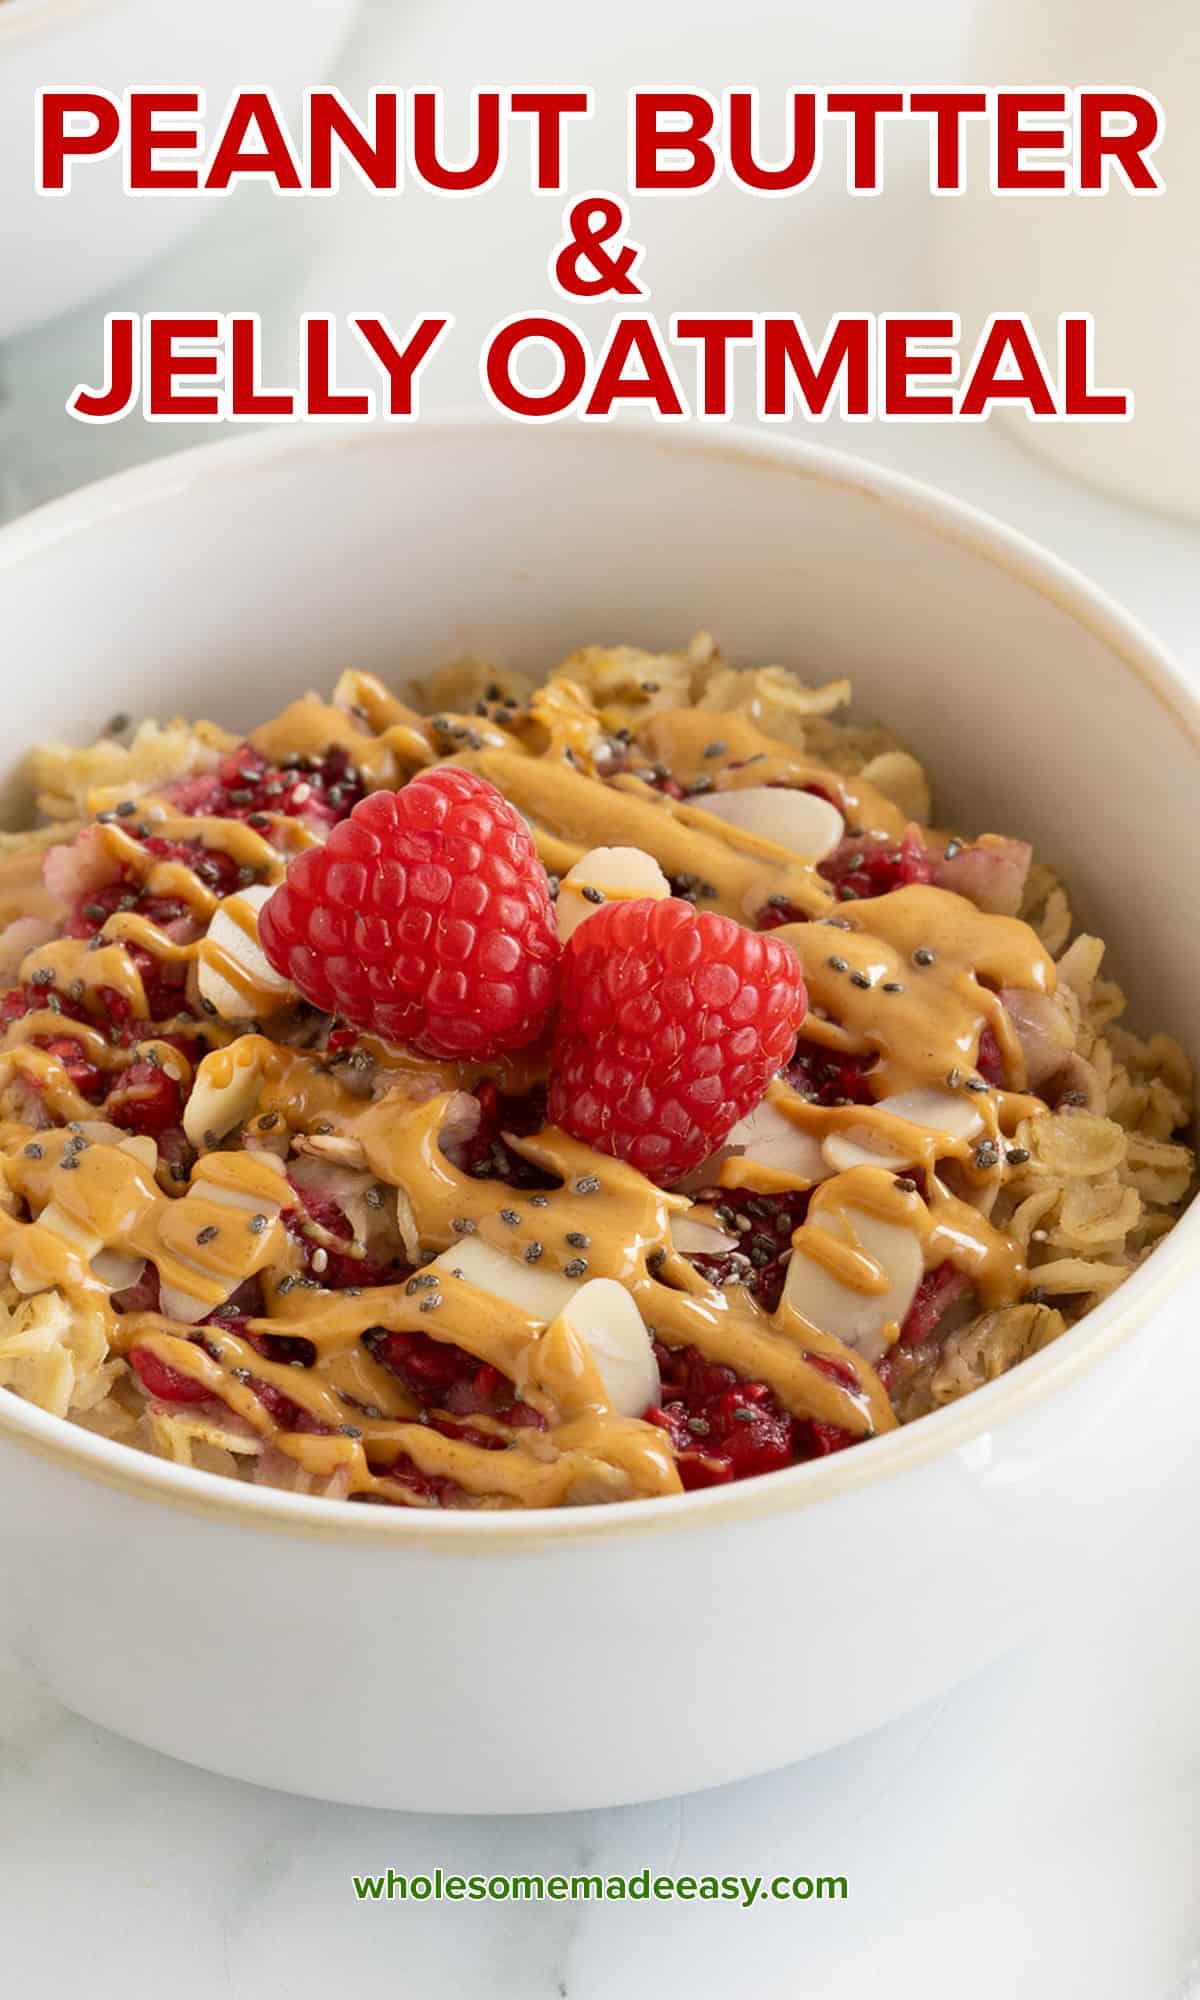 A close up shot of a bowl of peanut butter and jelly oatmeal on a kitchen counter with text.